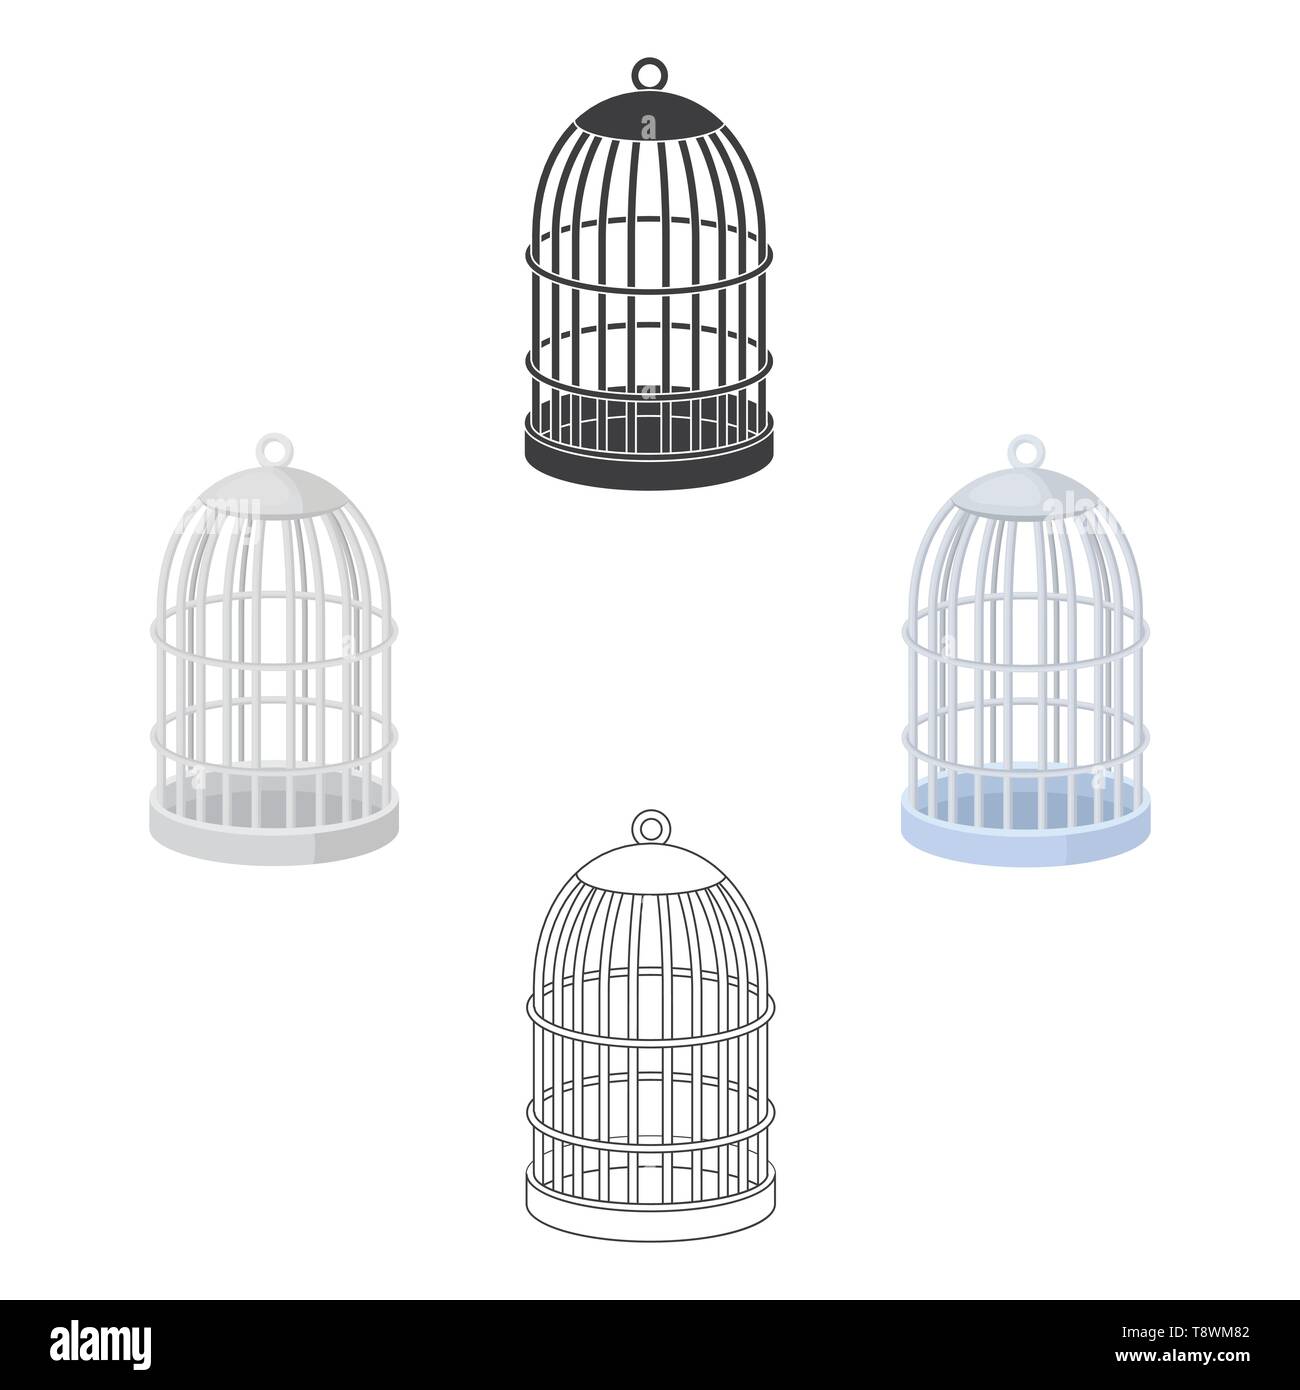 Black And White Image Of Large English Vintage Brass Birdcage Stock Photo -  Download Image Now - iStock